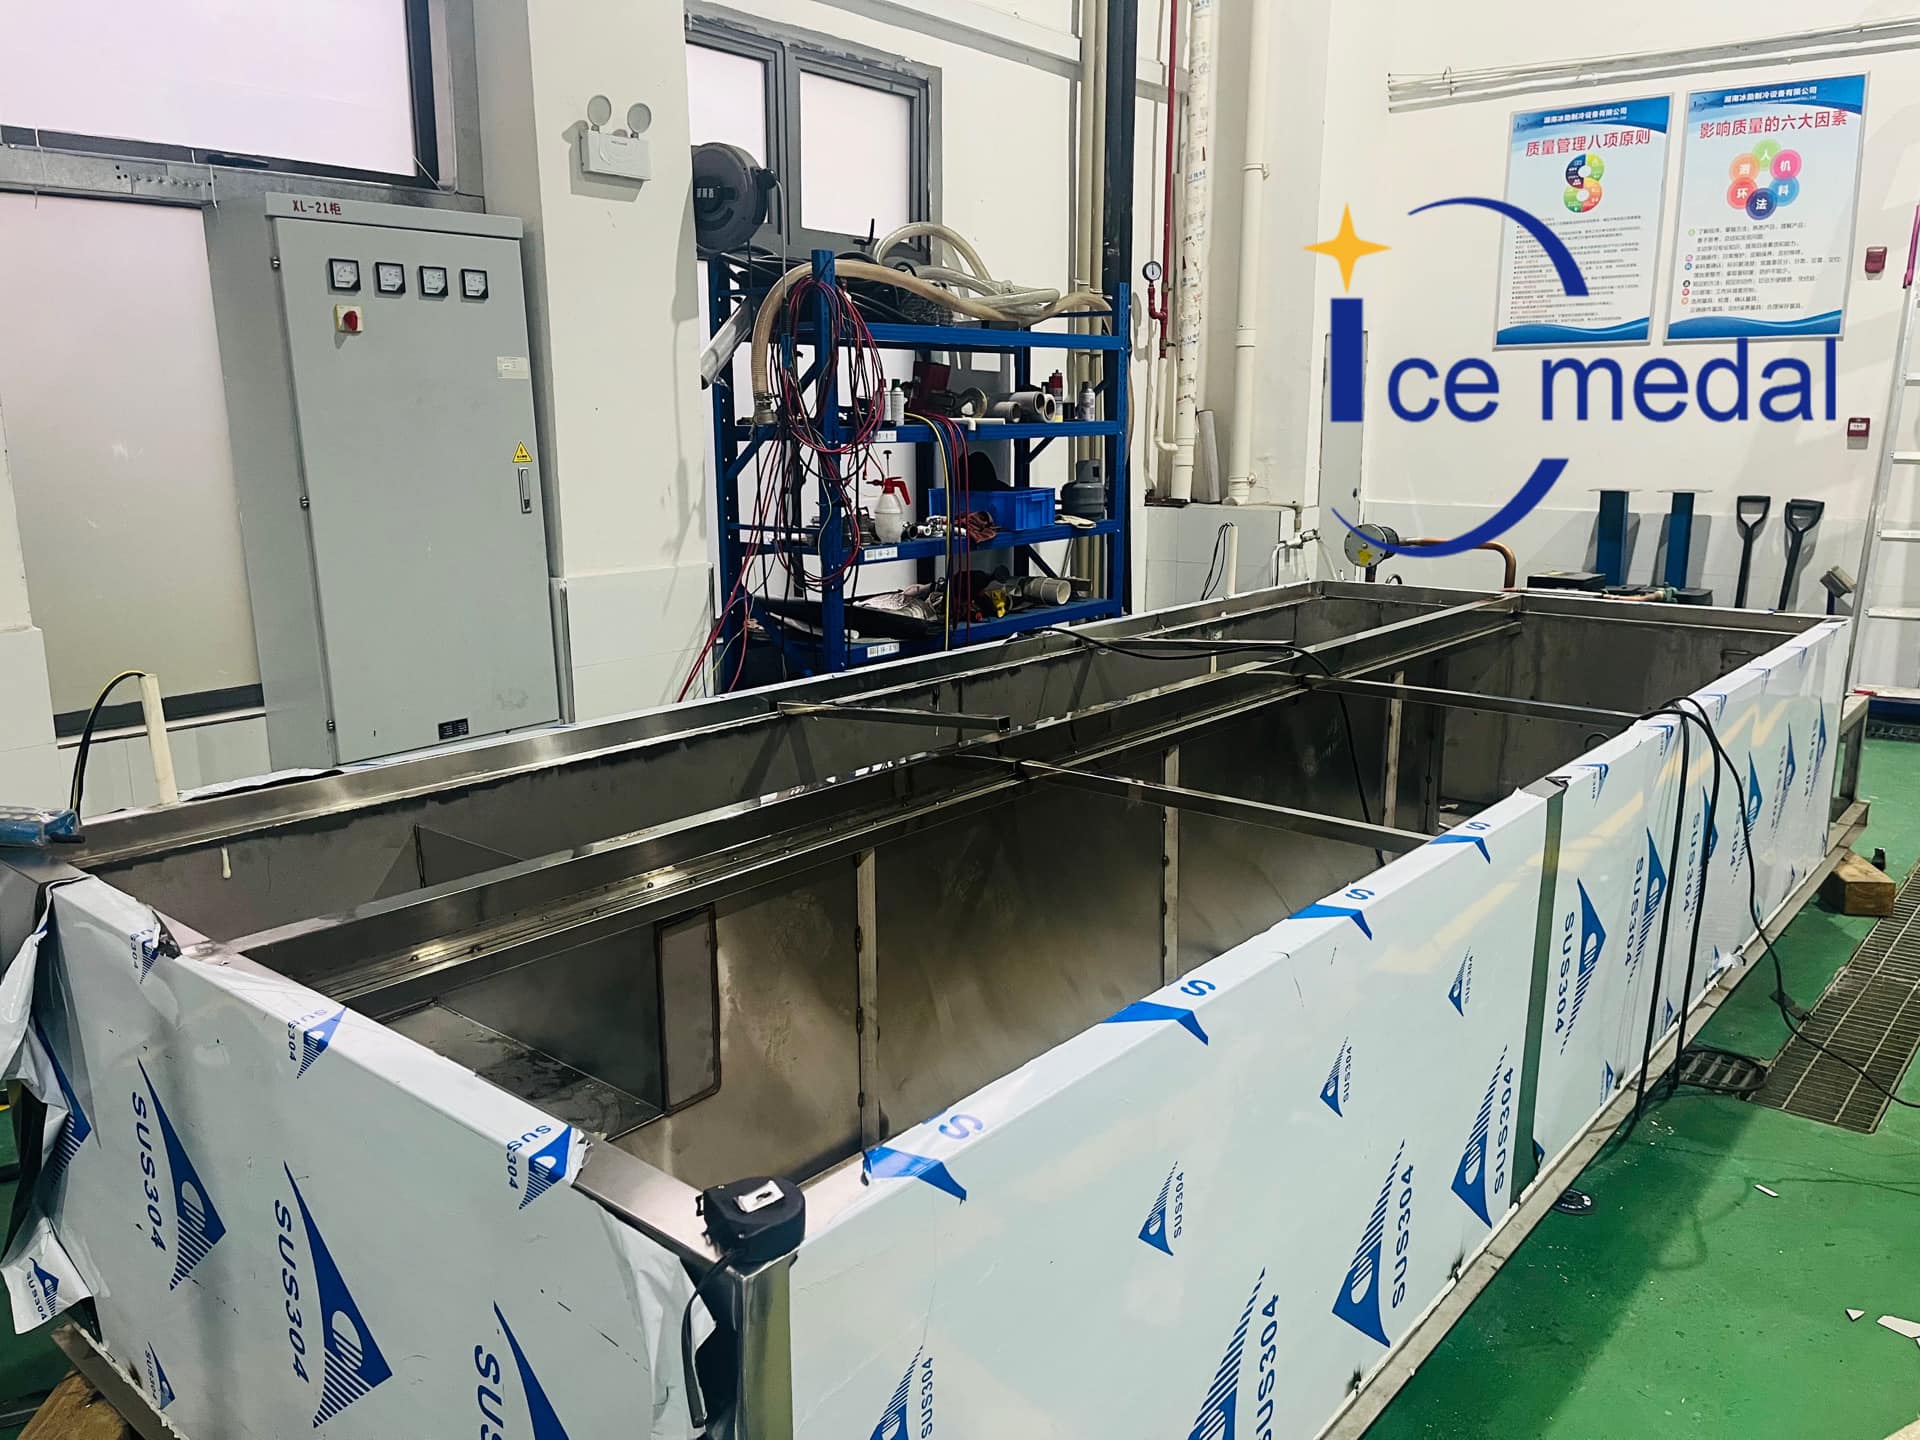 20 T- Per Day Ice Brick Machine Capable of Producing Large Ice Cubes for Rapid Cooling And Preservation